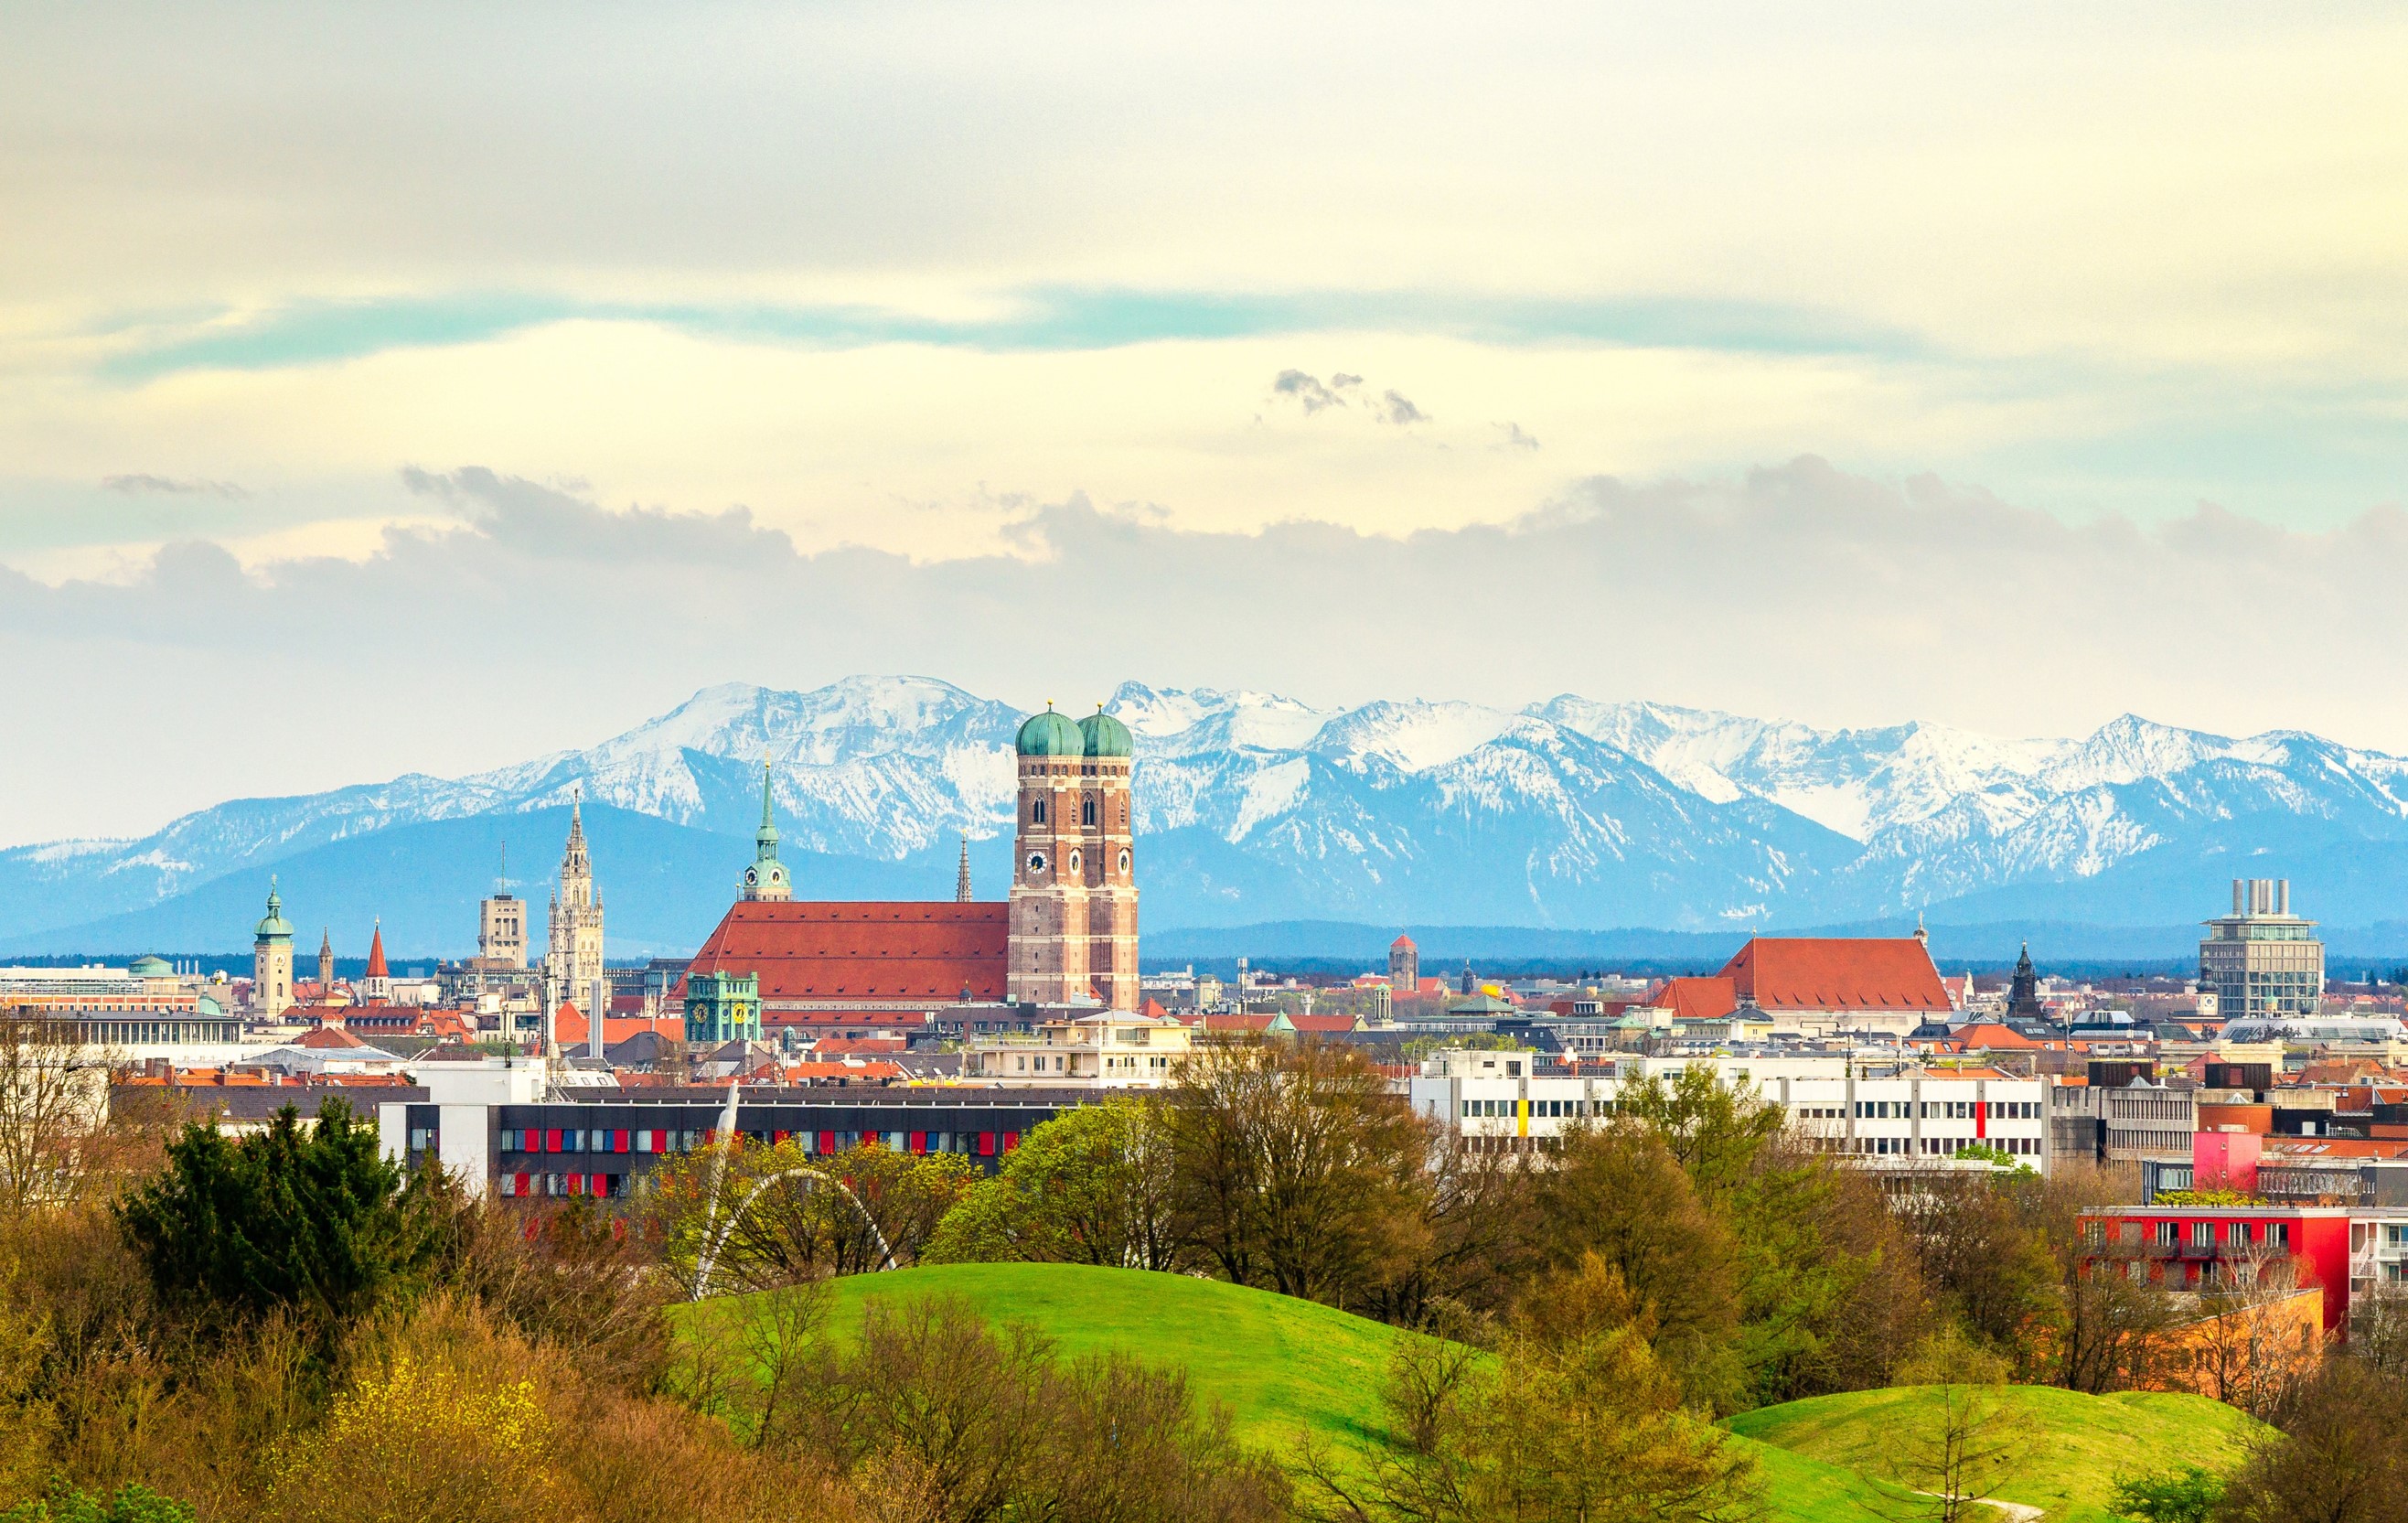 München and the Alps